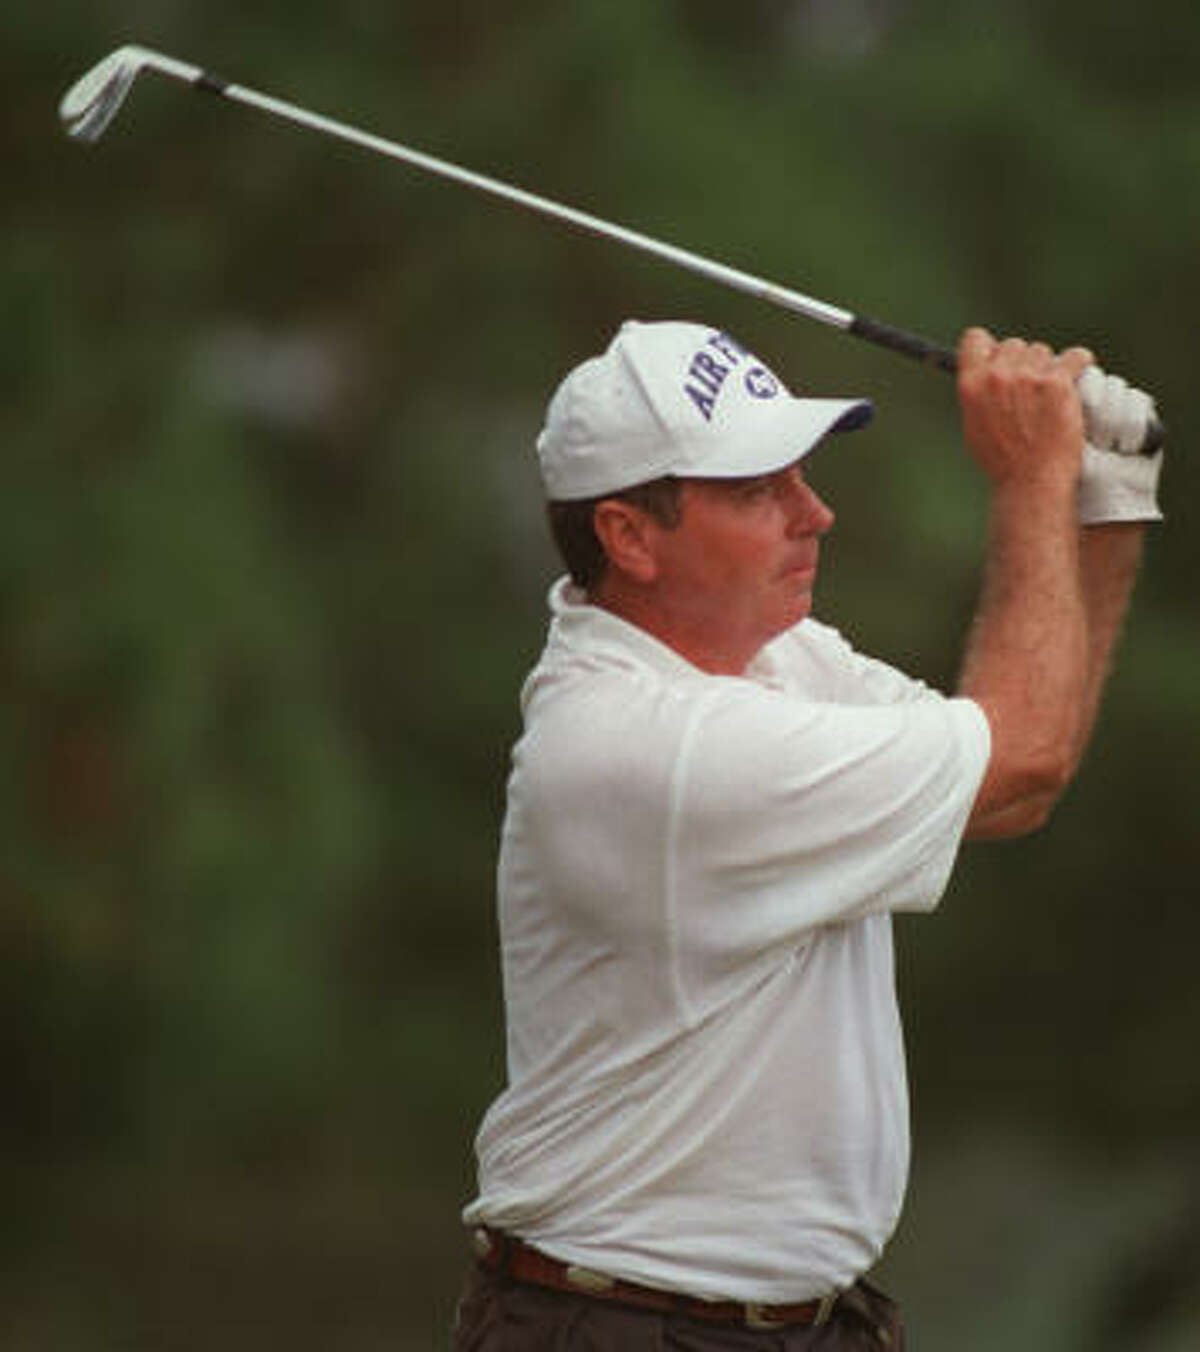 Pat Youngs Always in contention but has never reached the winner's circle. Has played the event for more than 20 years.